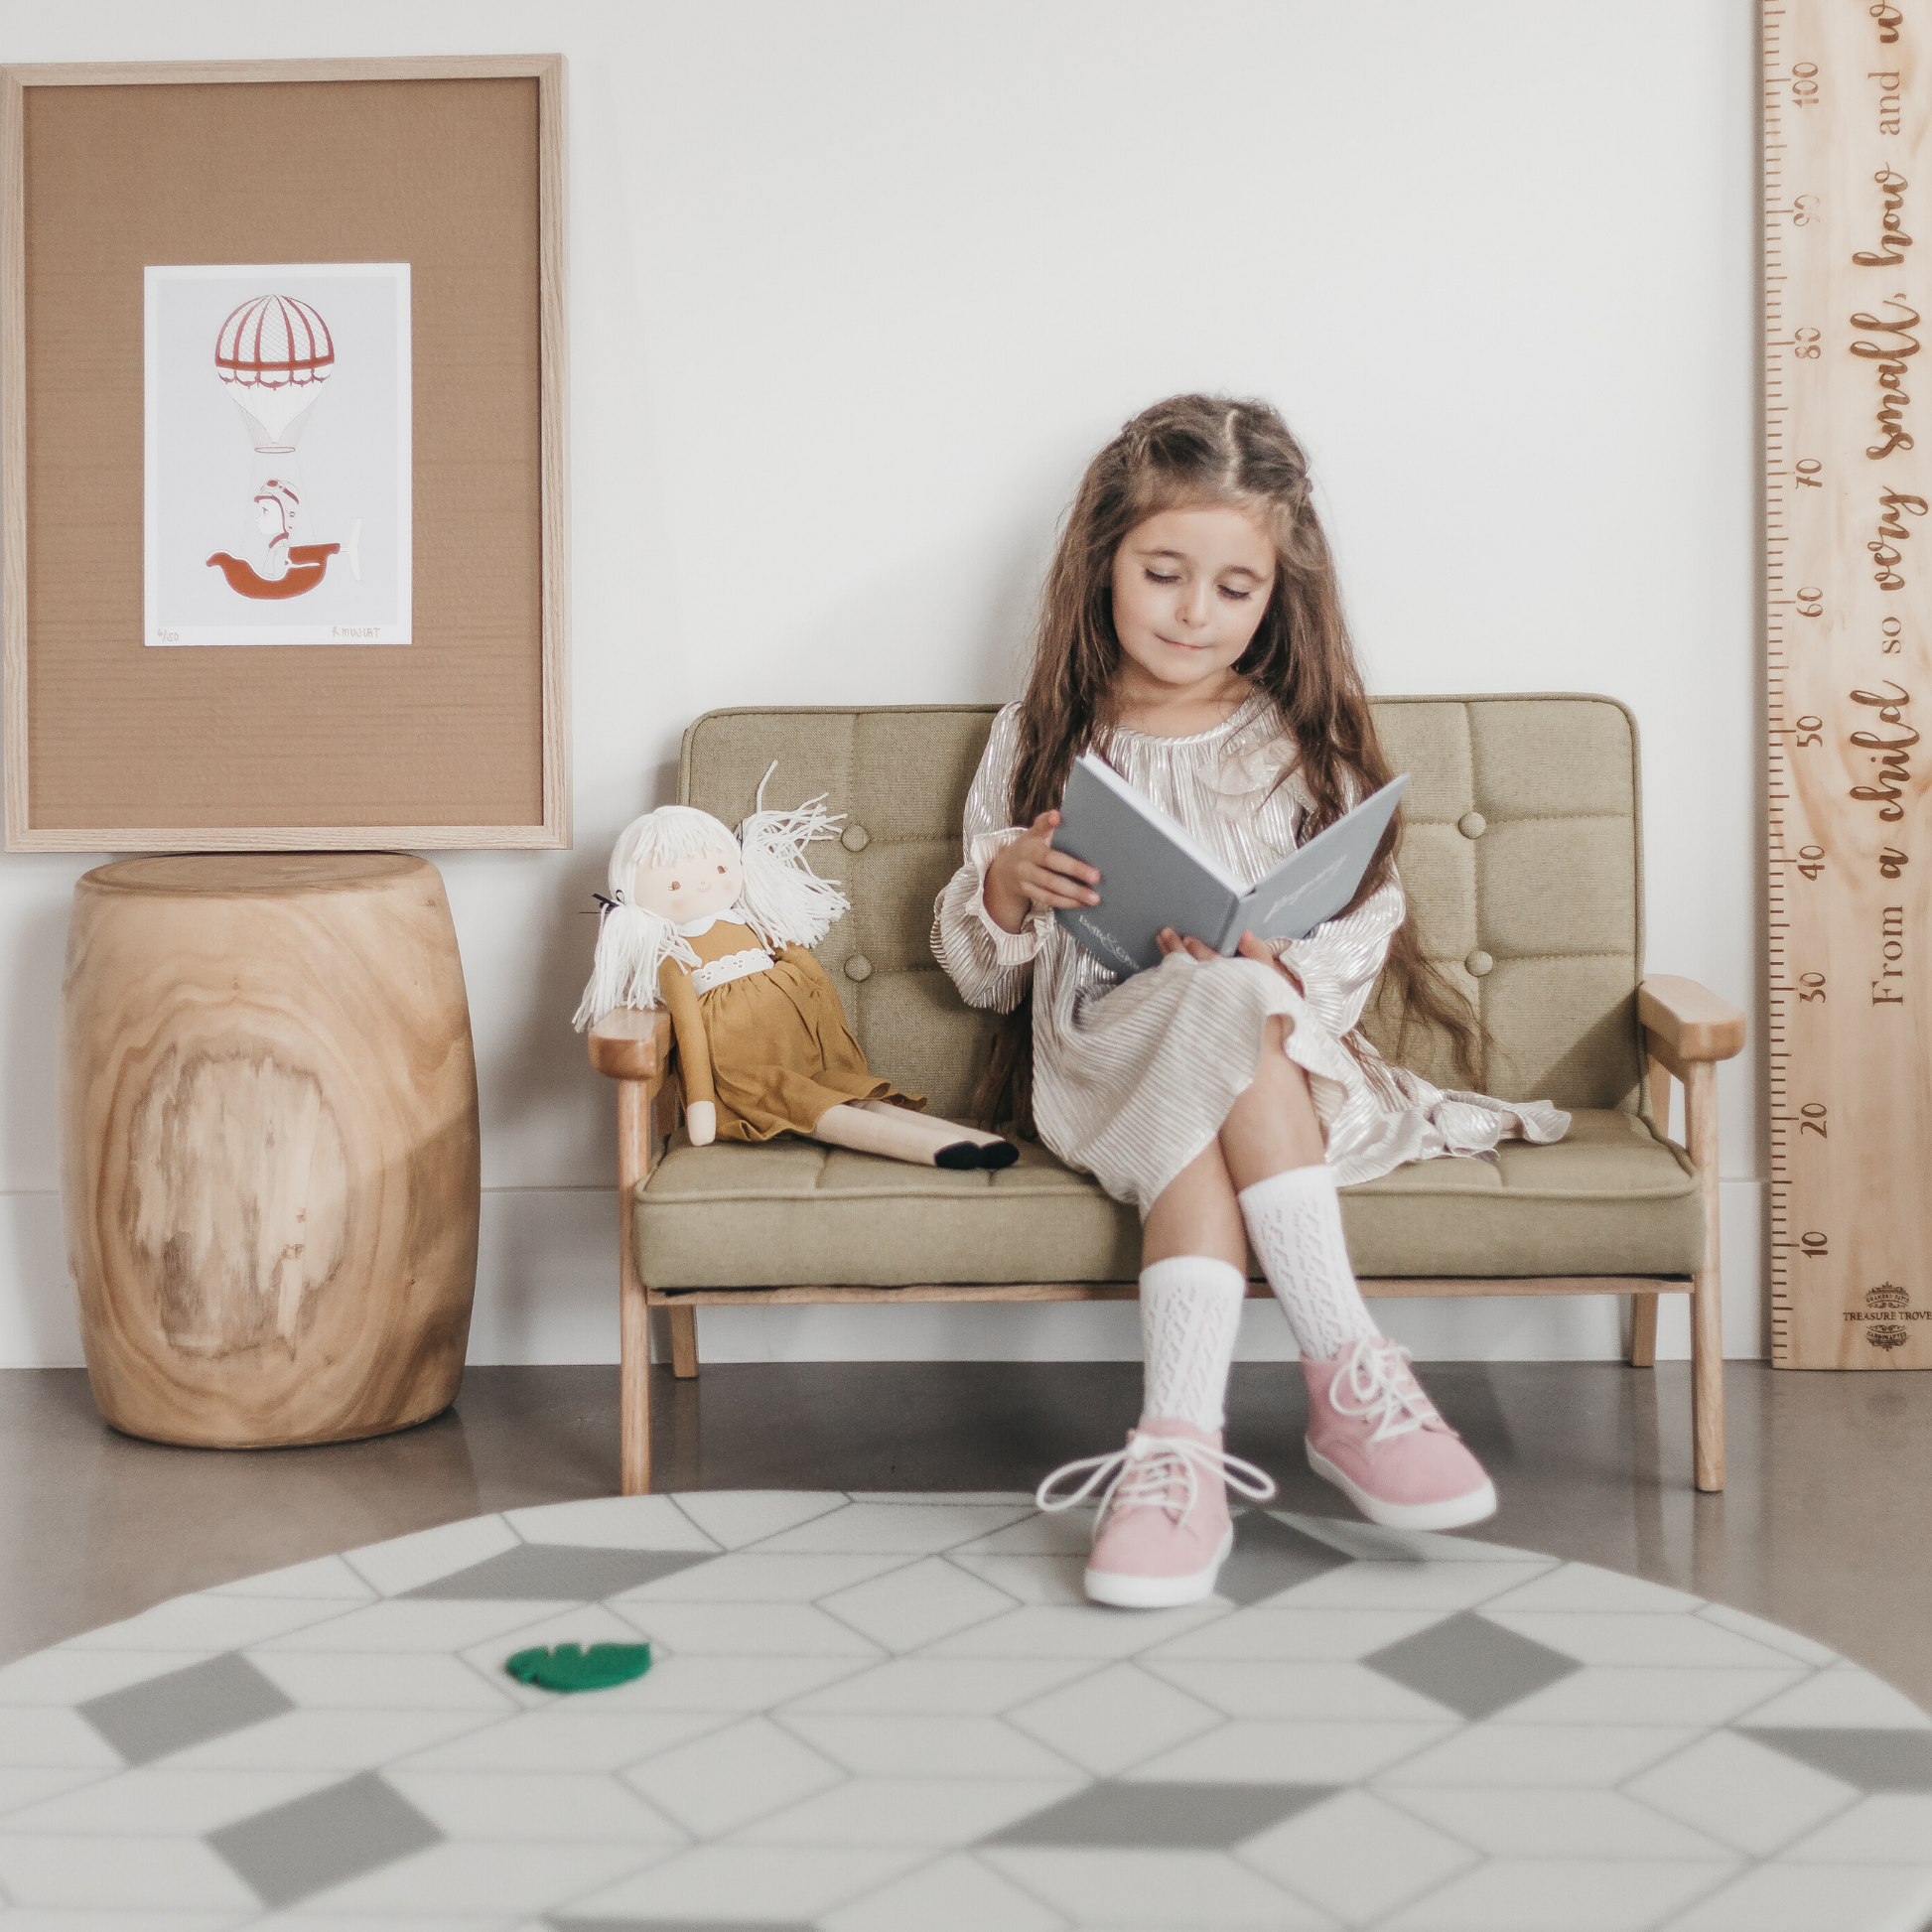 Girl sitting reading book with pink leather shoes on